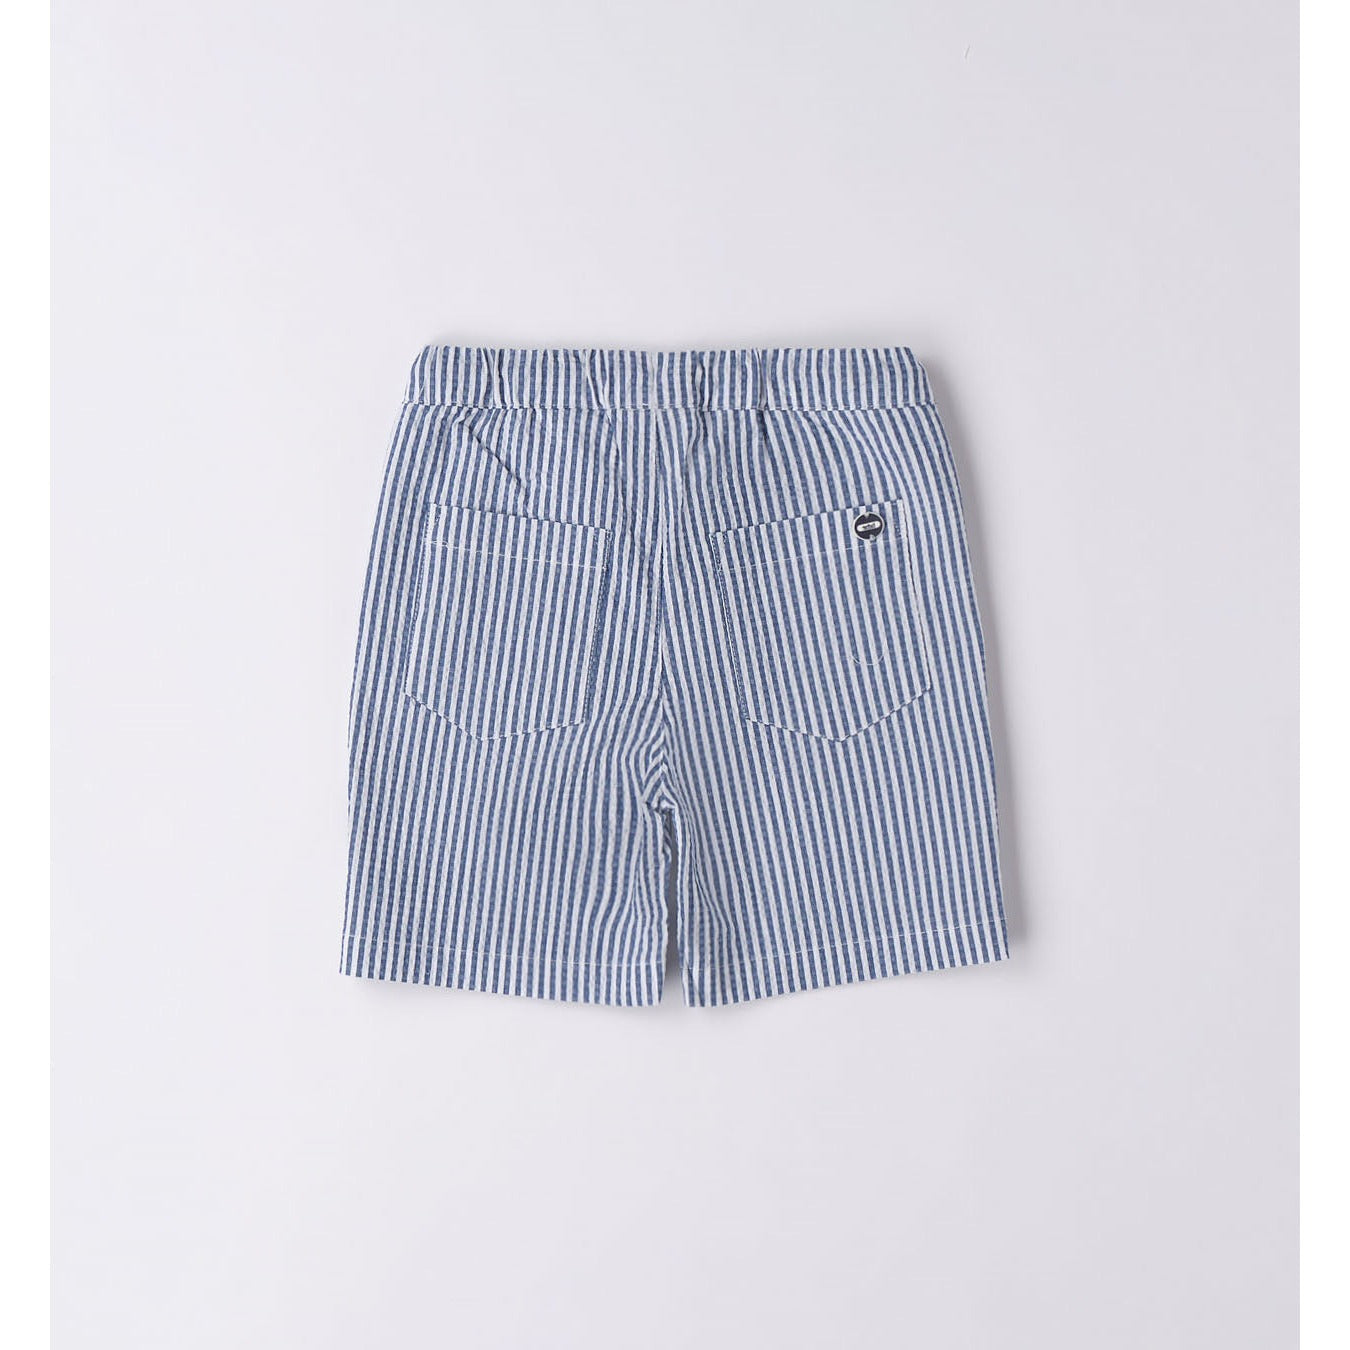 Load image into Gallery viewer, Navy and White Striped Shorts 102 - Lala Kids 
